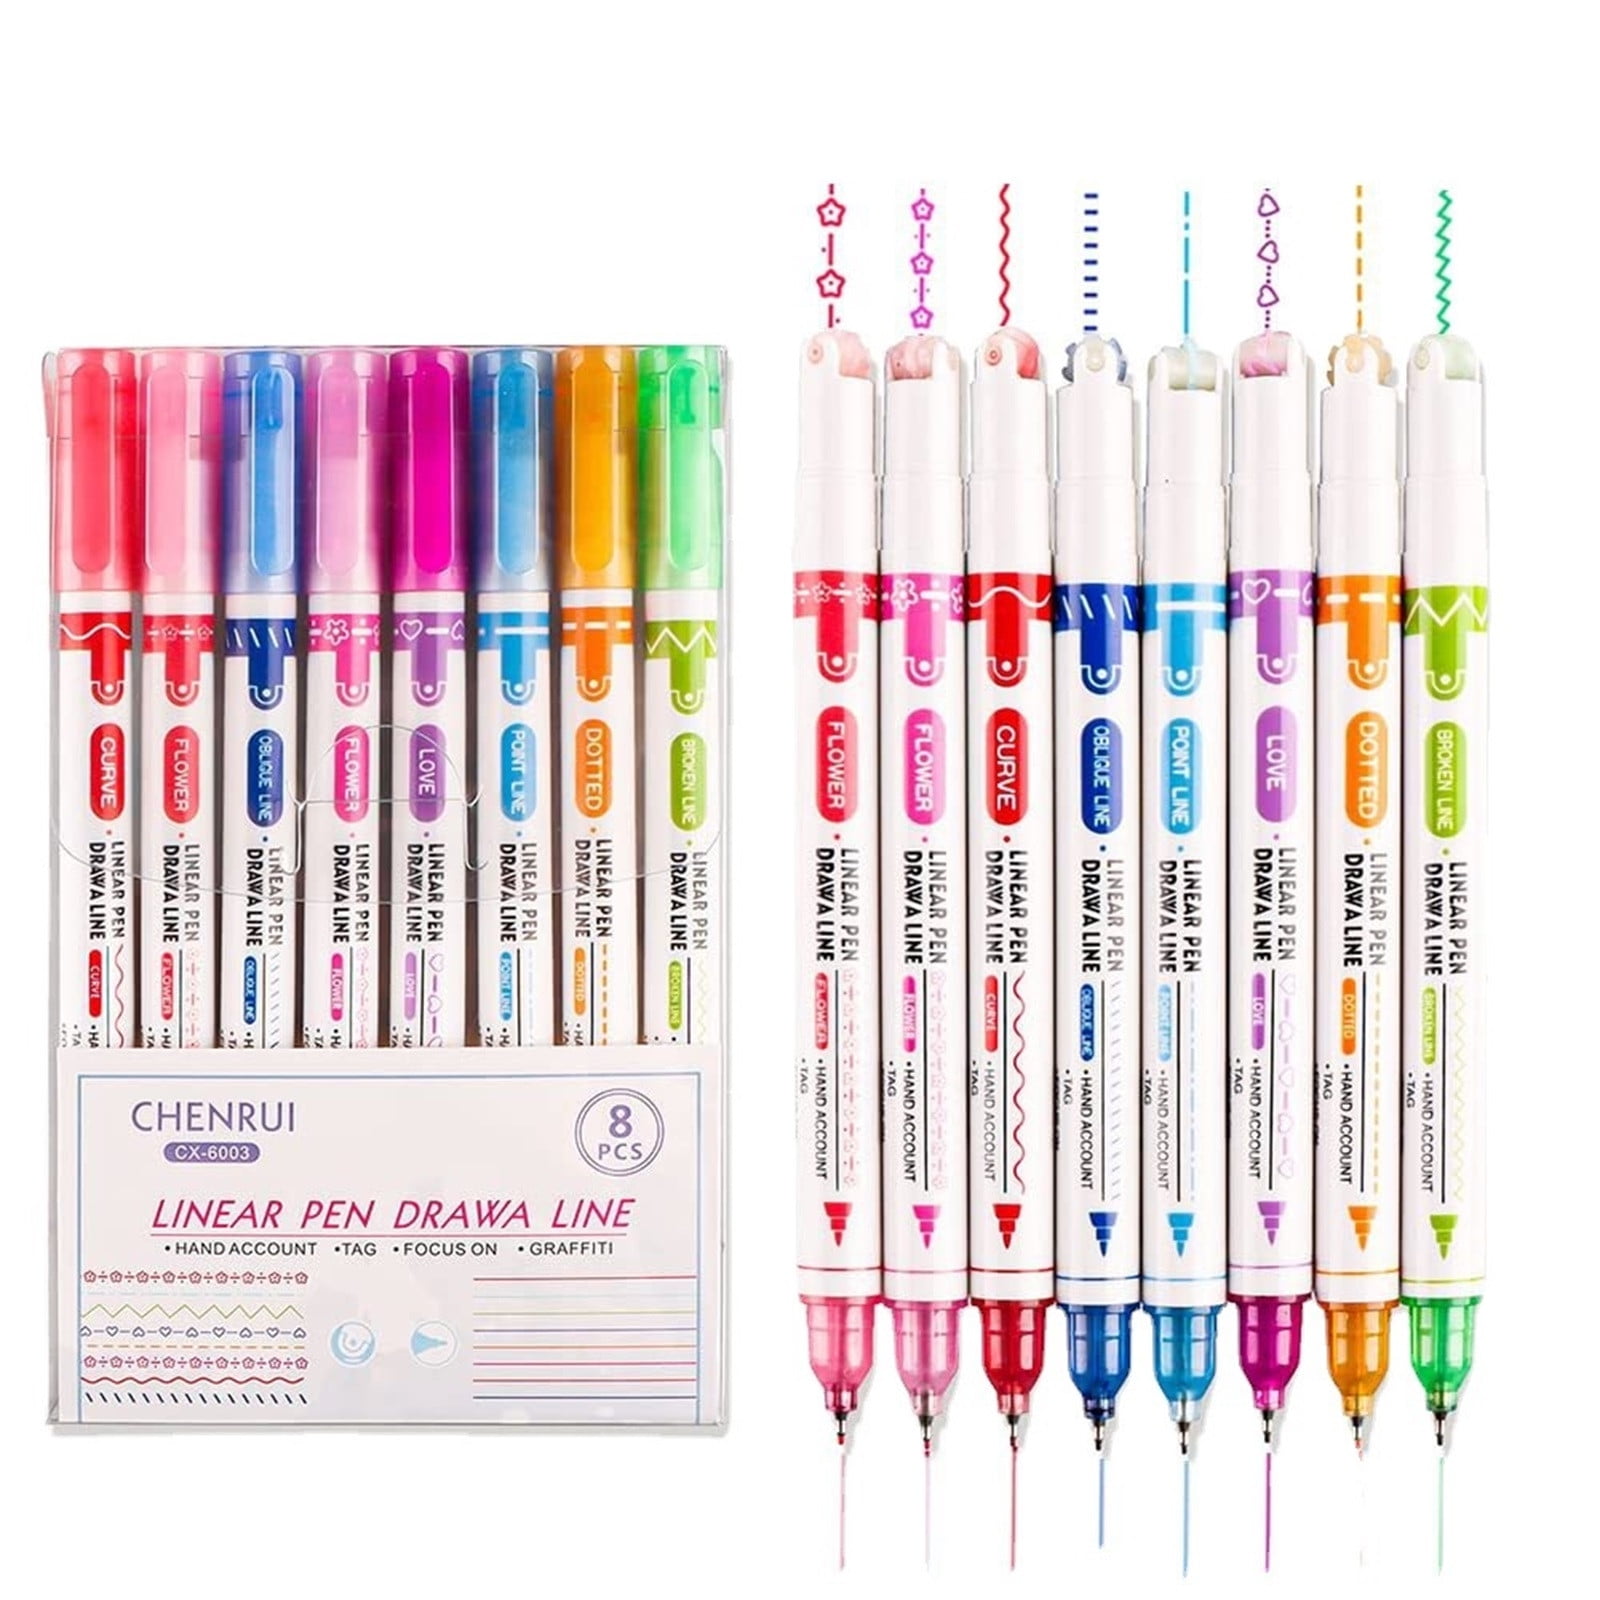  YISAN Fine Tip Markers,Brush Markers,36 Colors,Dual Tip,Drawing  Pens,Art Pens,Fine Point Colored Journal Pens for Artists,Adult Coloring,70771  : Arts, Crafts & Sewing